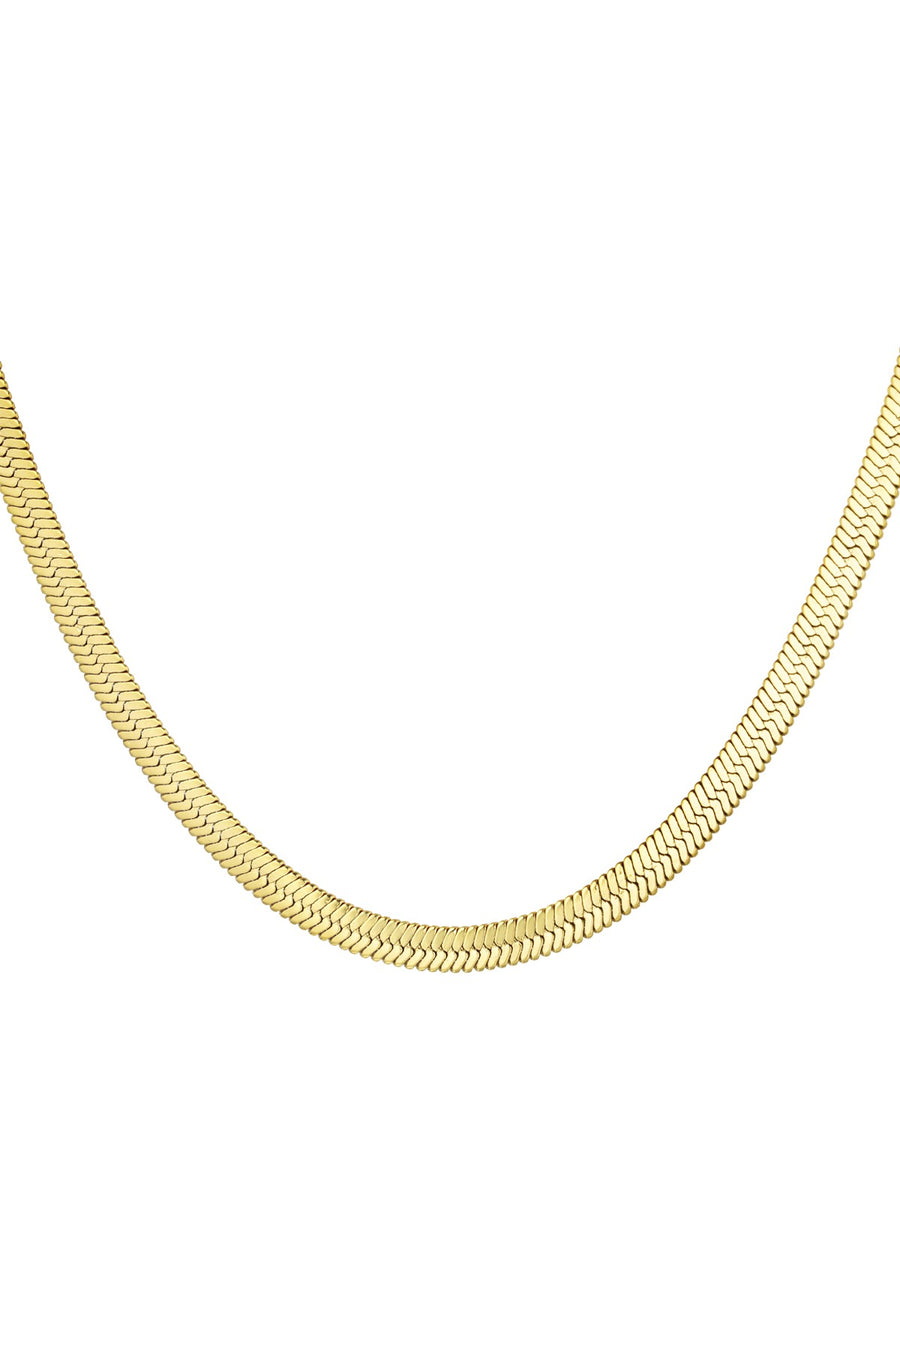 Flat Braided Chain - Gold & Silver Available